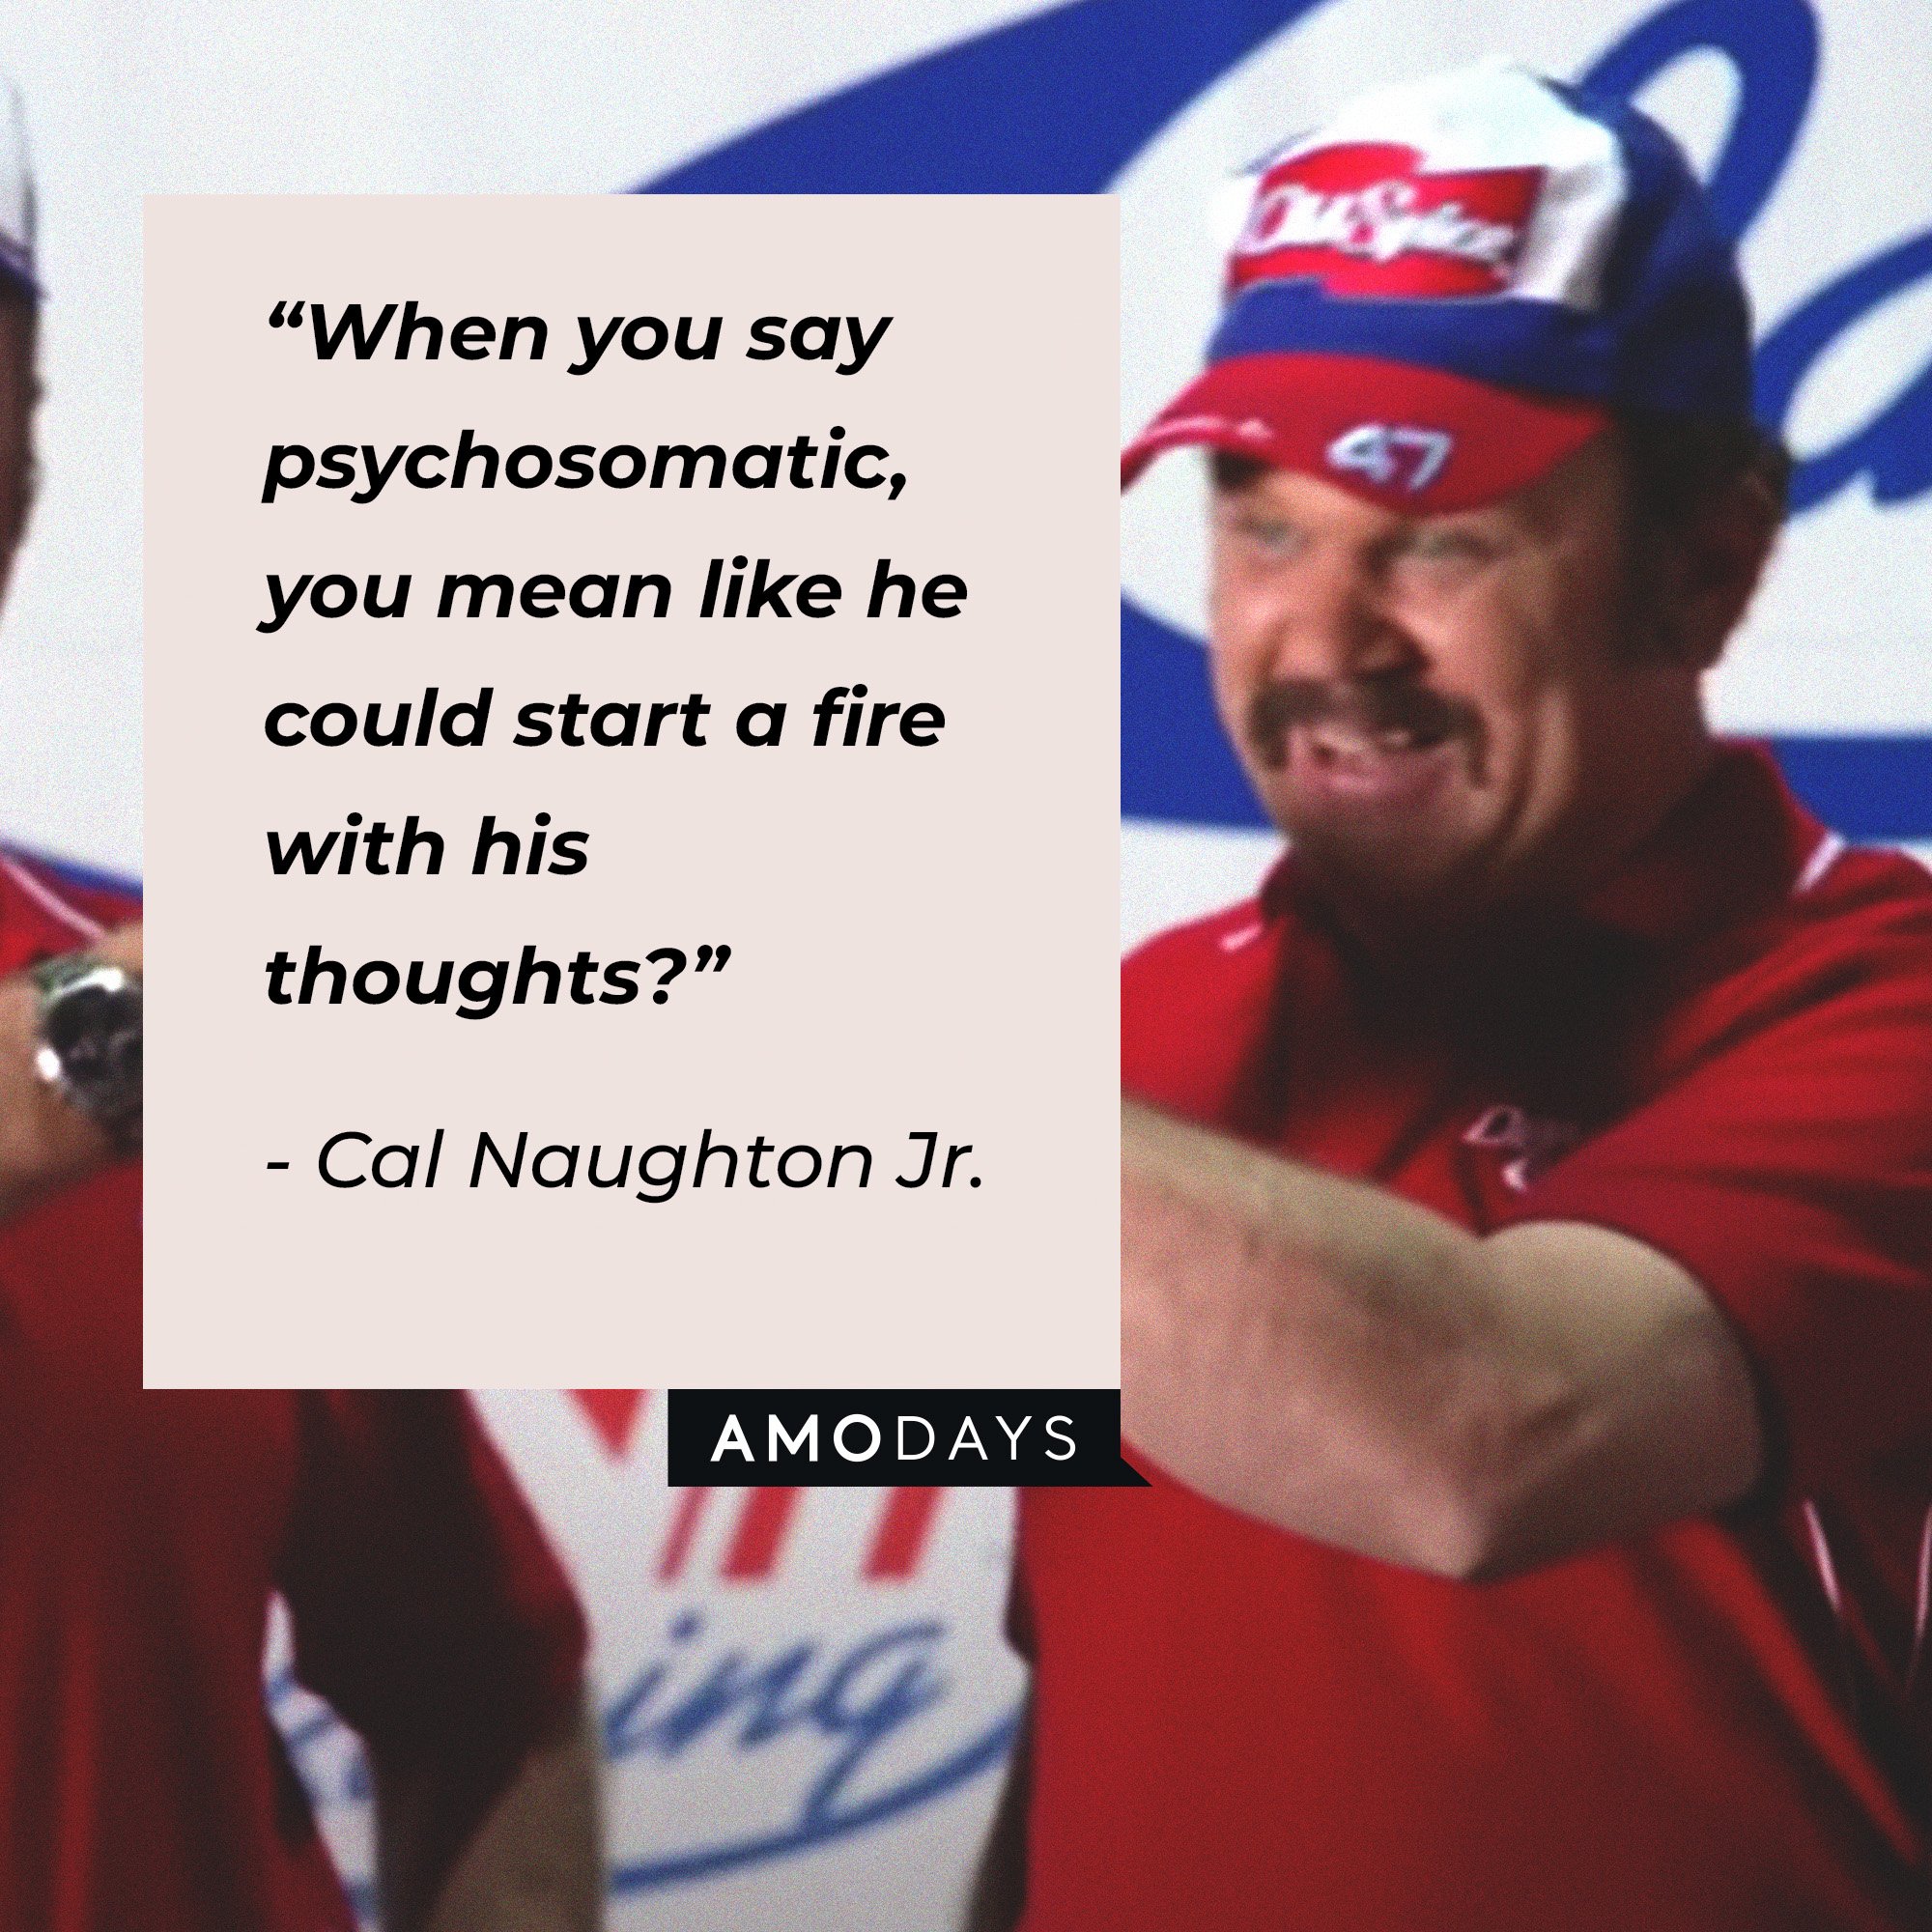 Cal Naughton Jr’s. quote: “When you say psychosomatic, you mean like he could start a fire with his thoughts?” | Image: AmoDays